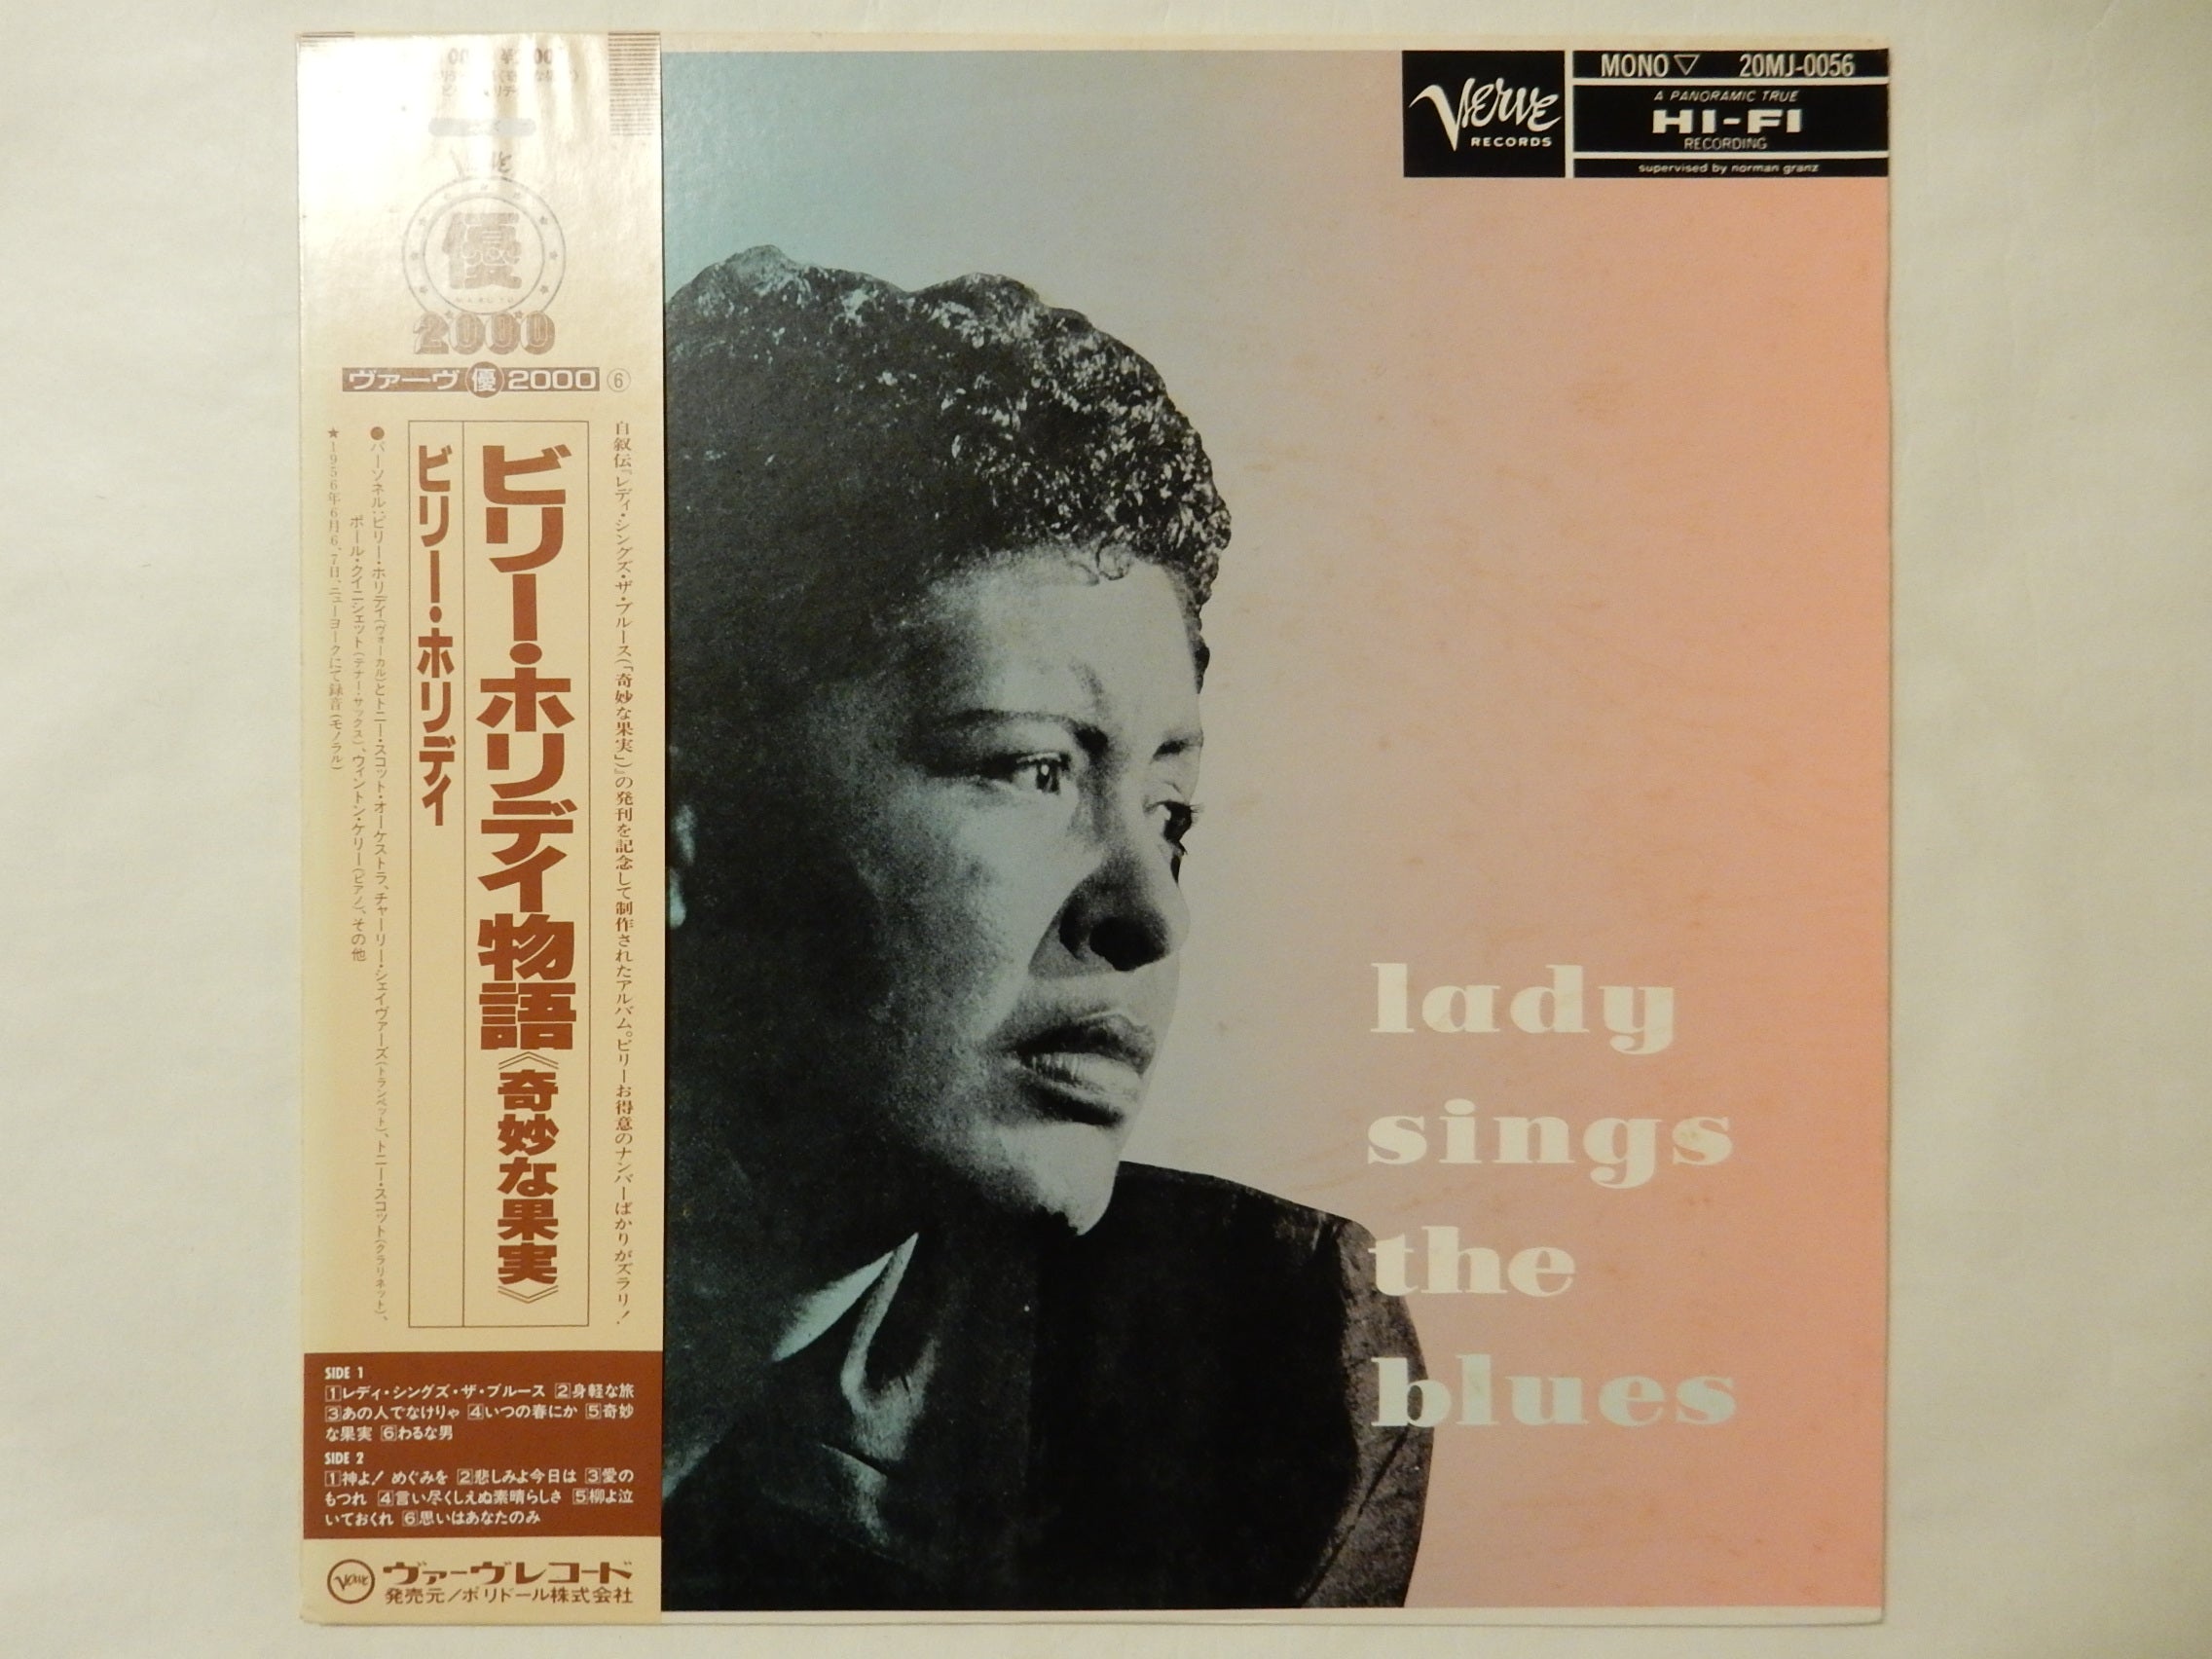 Billie Holiday - Lady Sings The Blues (LP-Vinyl Record/Used ...